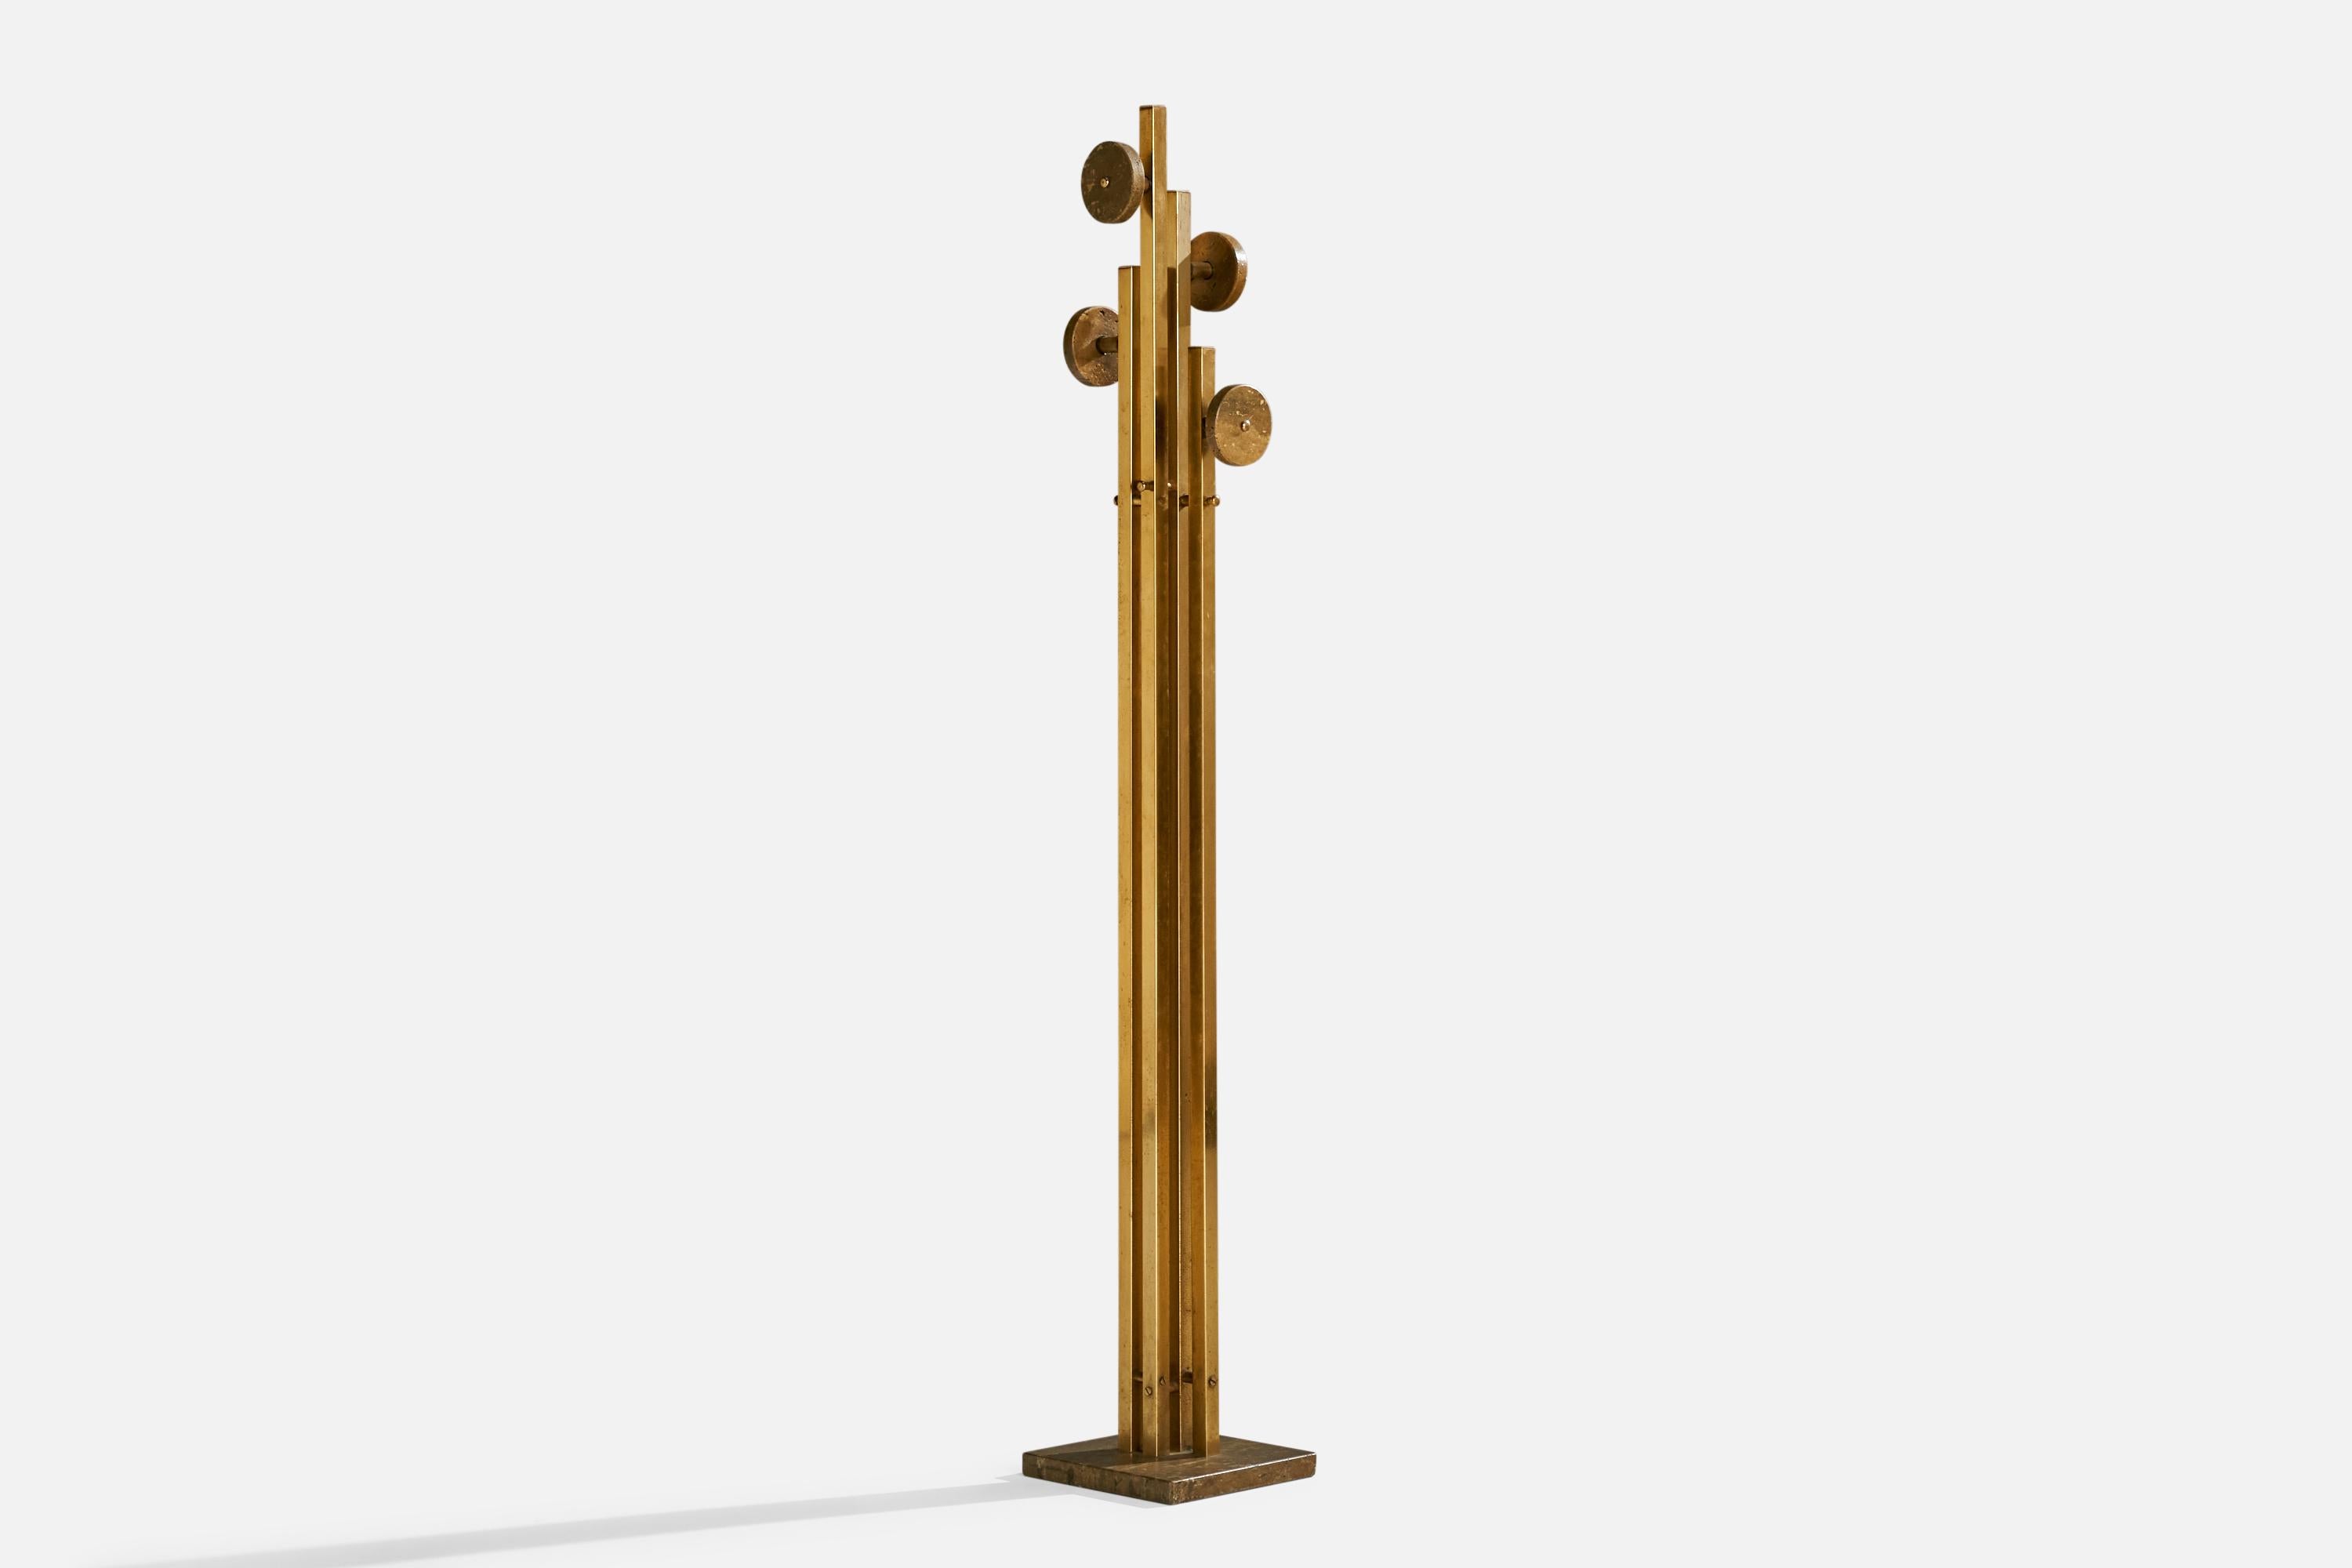 A brass hat stand designed and produced in Italy, c. 1940s.